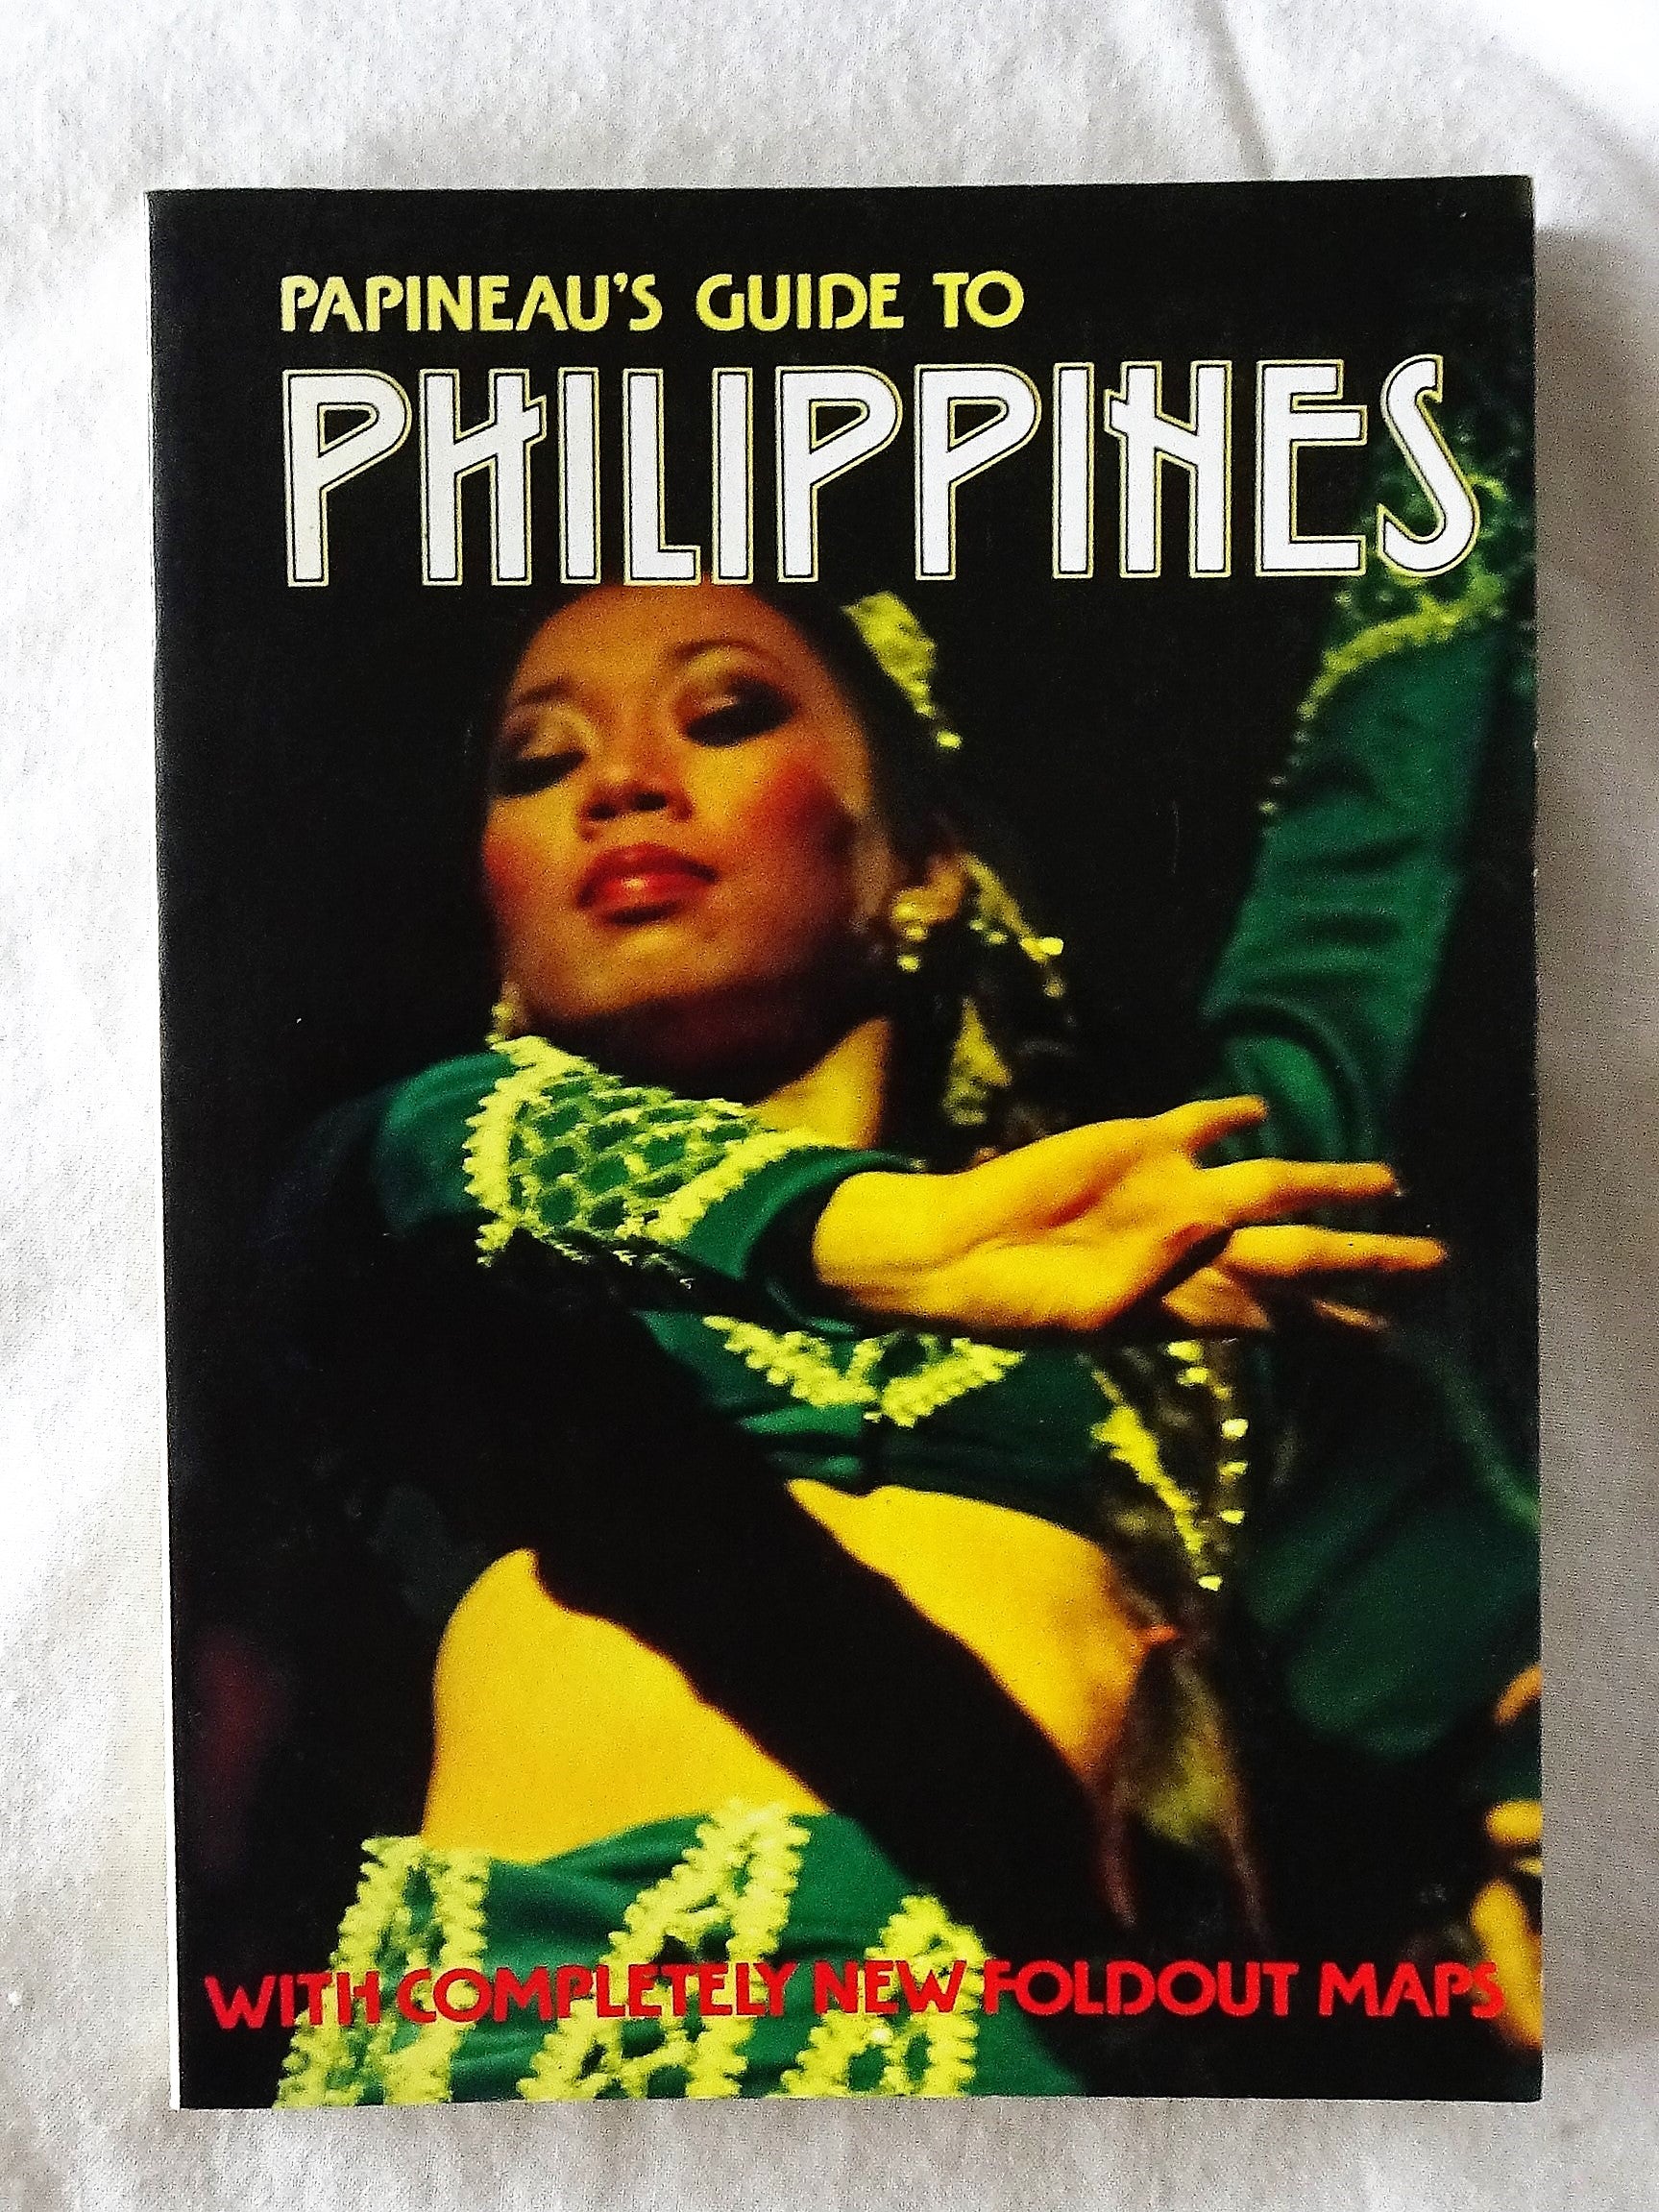 Papineau's Guide To Philippines by MPH Magazines